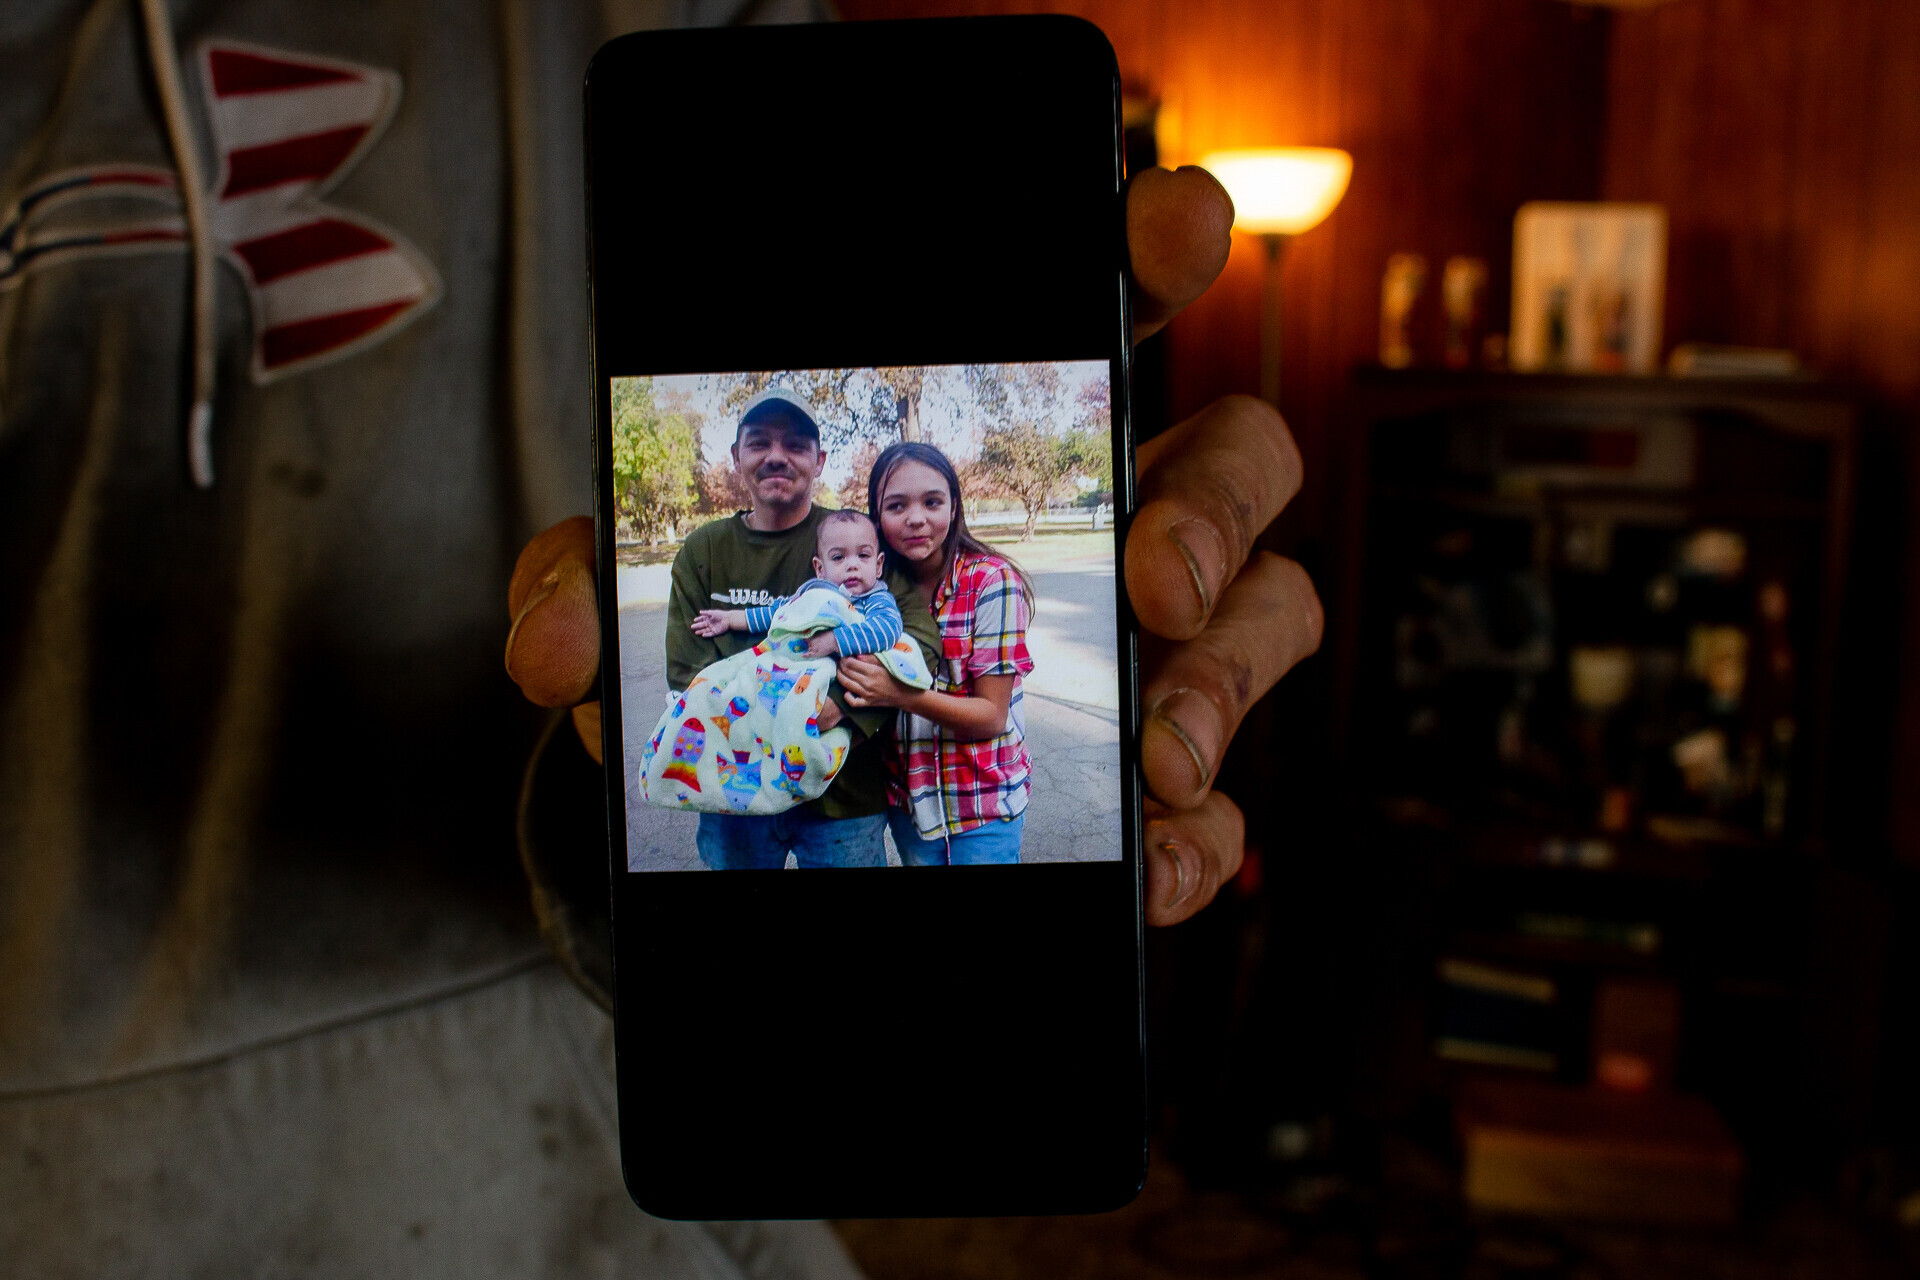 A man's hand holds a cell phone that displays a photo of himself with a teenage girl and her baby boy who clutches a baby blanket.